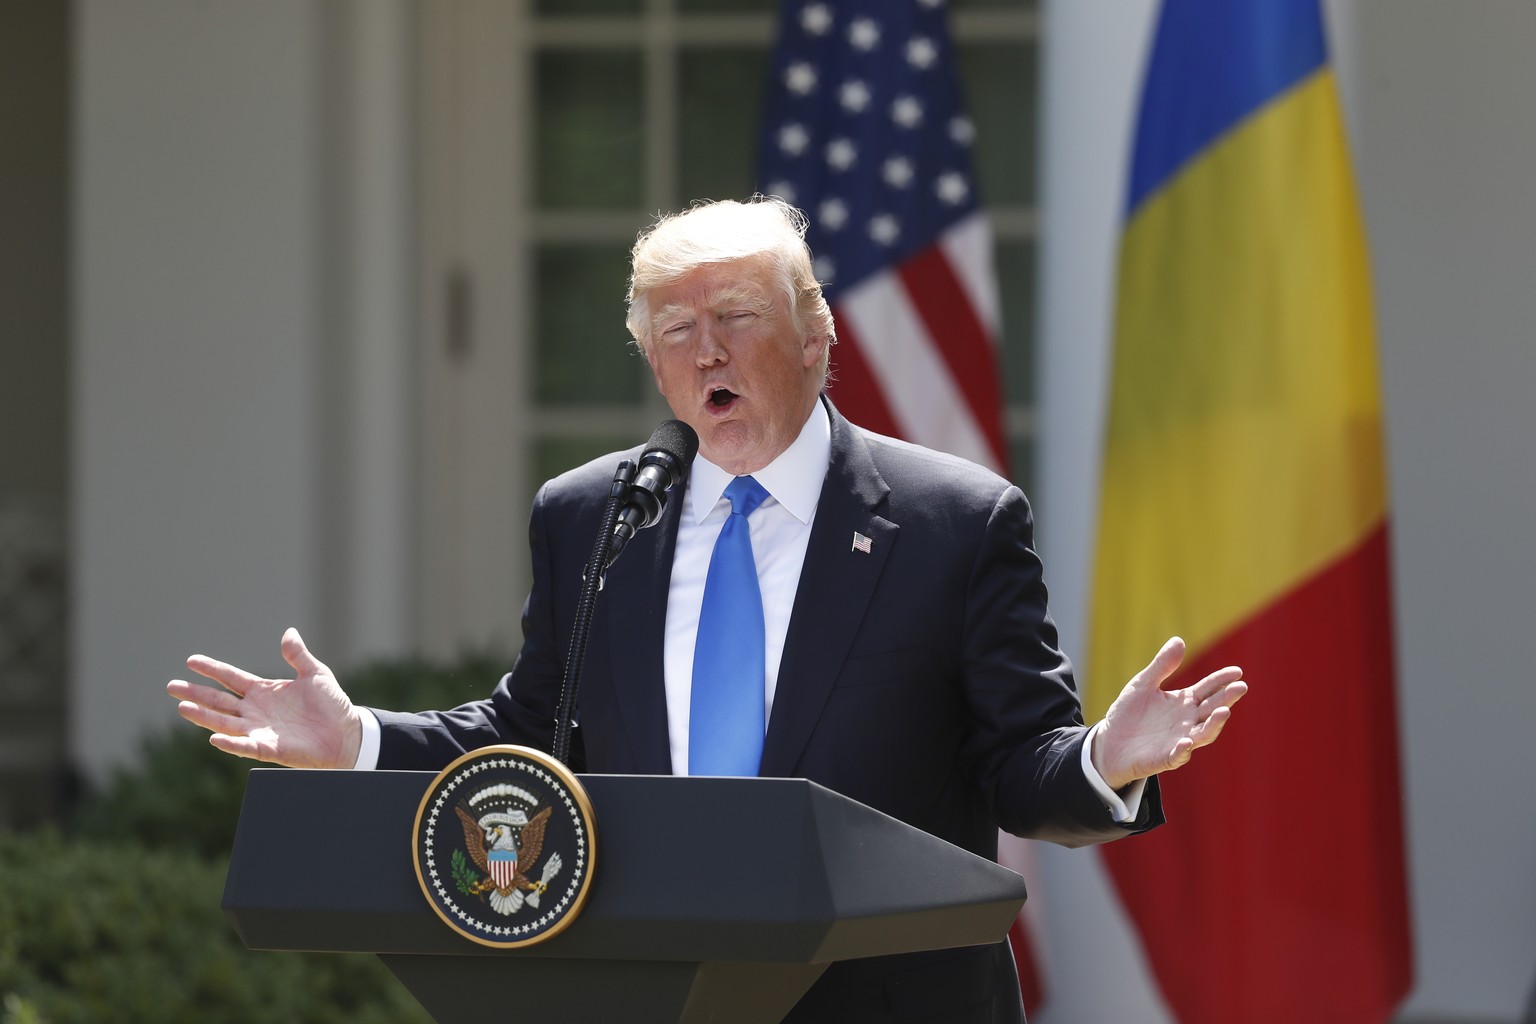 President Donald Trump with Romanian President Klaus Werner Iohannis, speaks during their joint news conference in the Rose Garden of the White House in Washington, Friday, June 9, 2017. (AP Photo/Pab ...